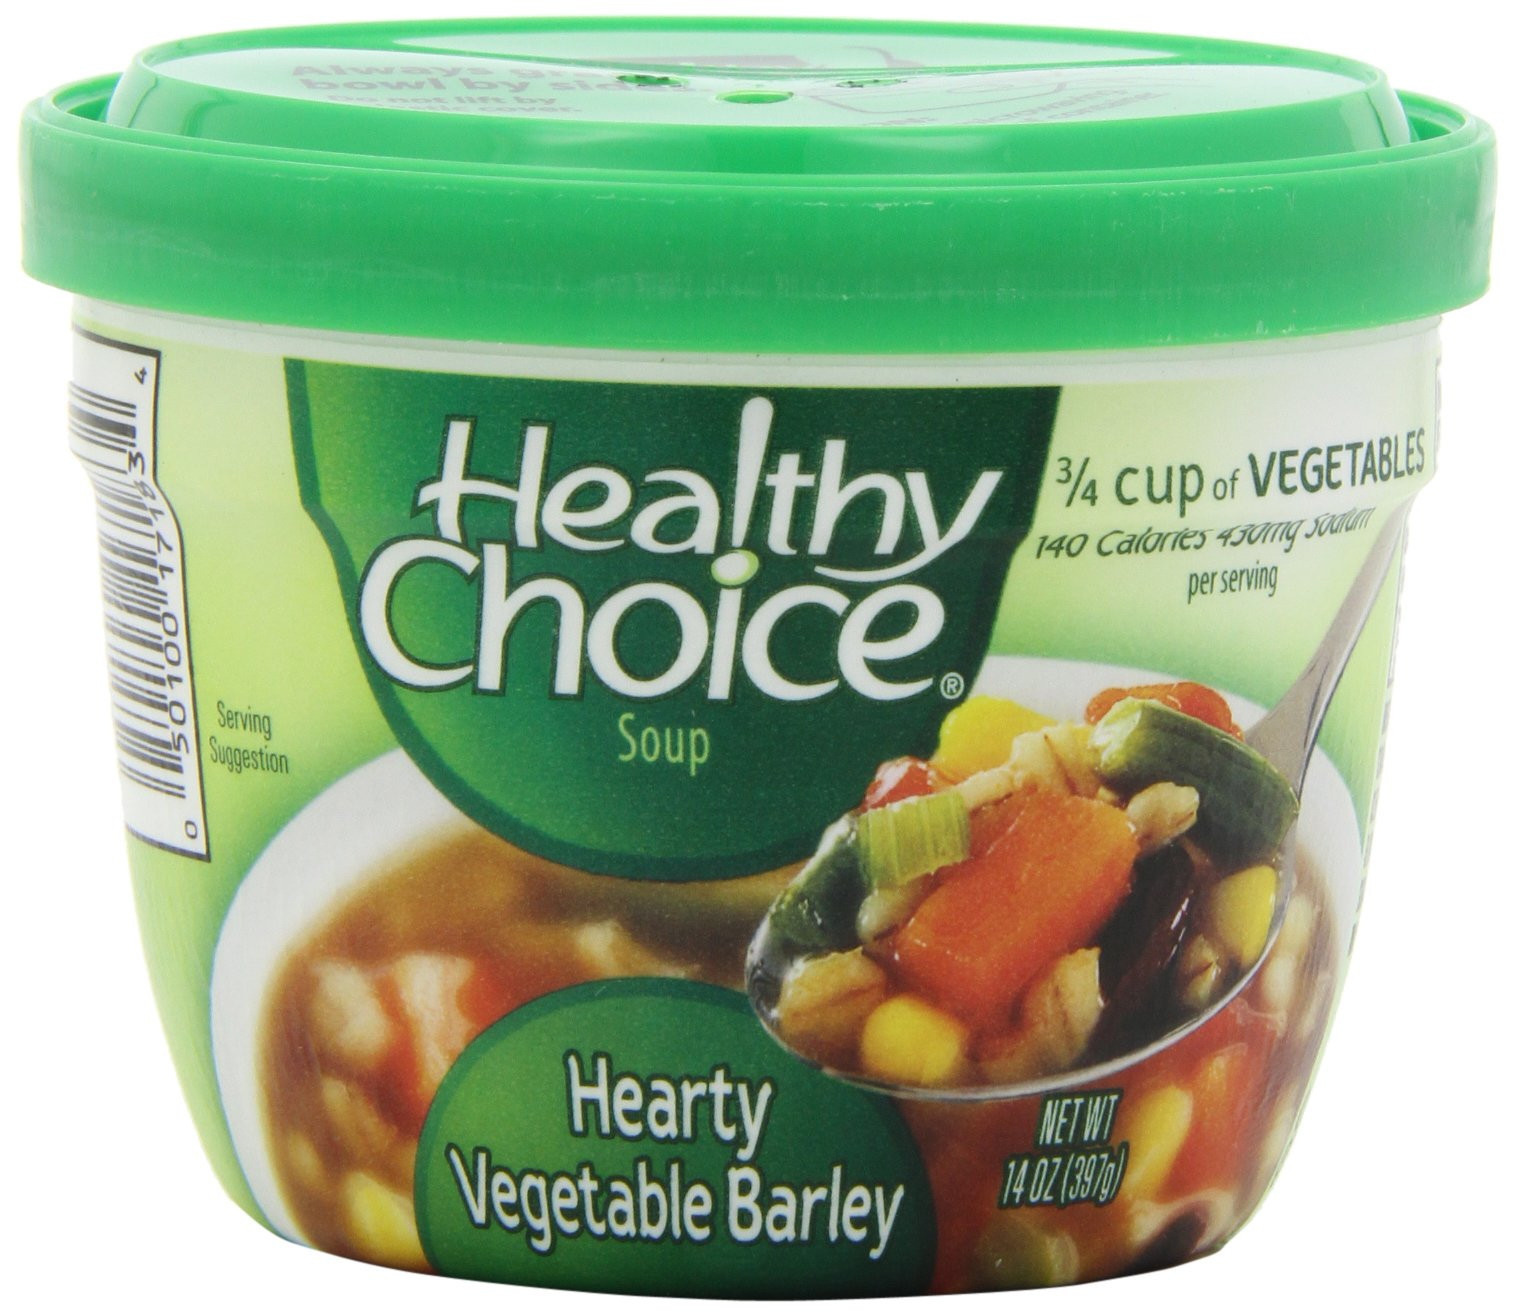 Healthy Choice Chicken Noodle Soup
 Amazon Healthy Choice Country Ve able Soup 14